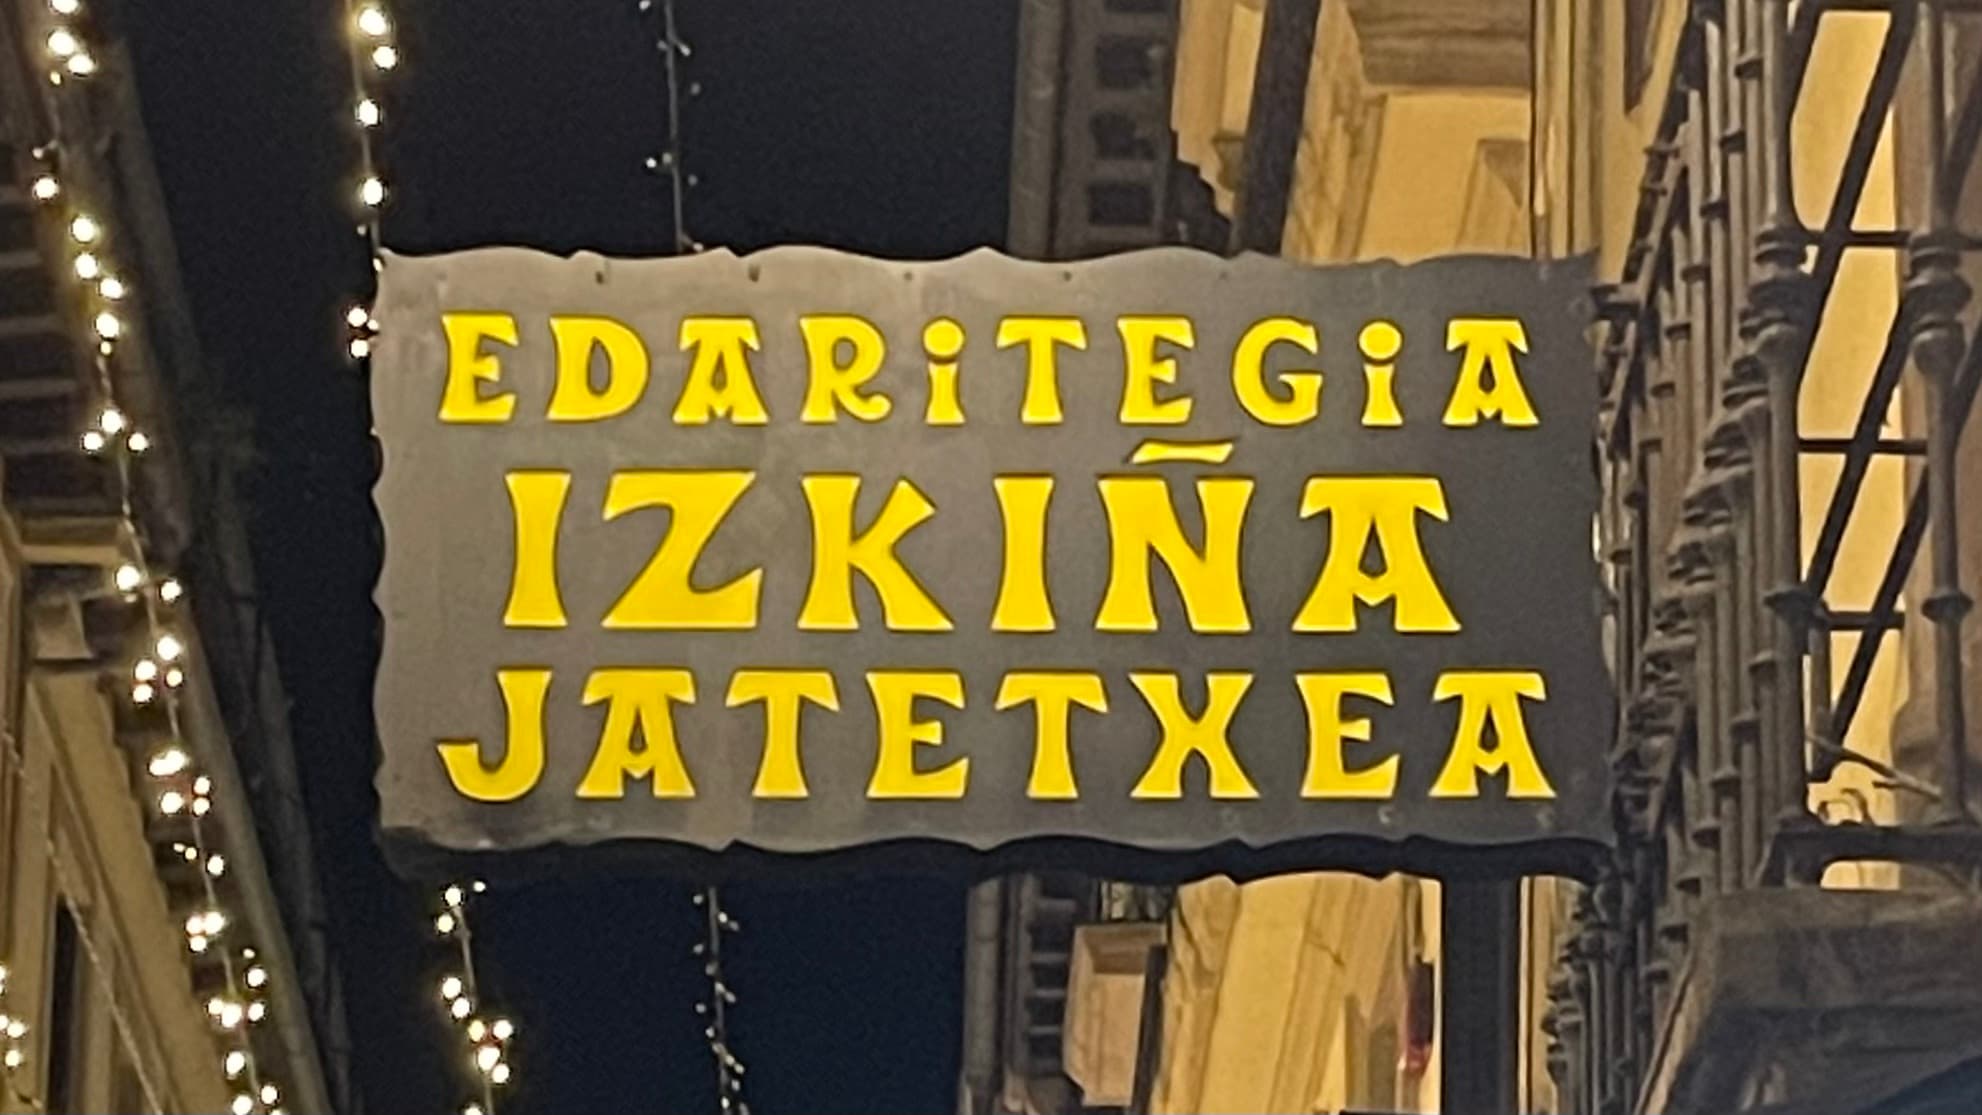 A storefront sign written in Basque with large, bold yellow letters on a black background